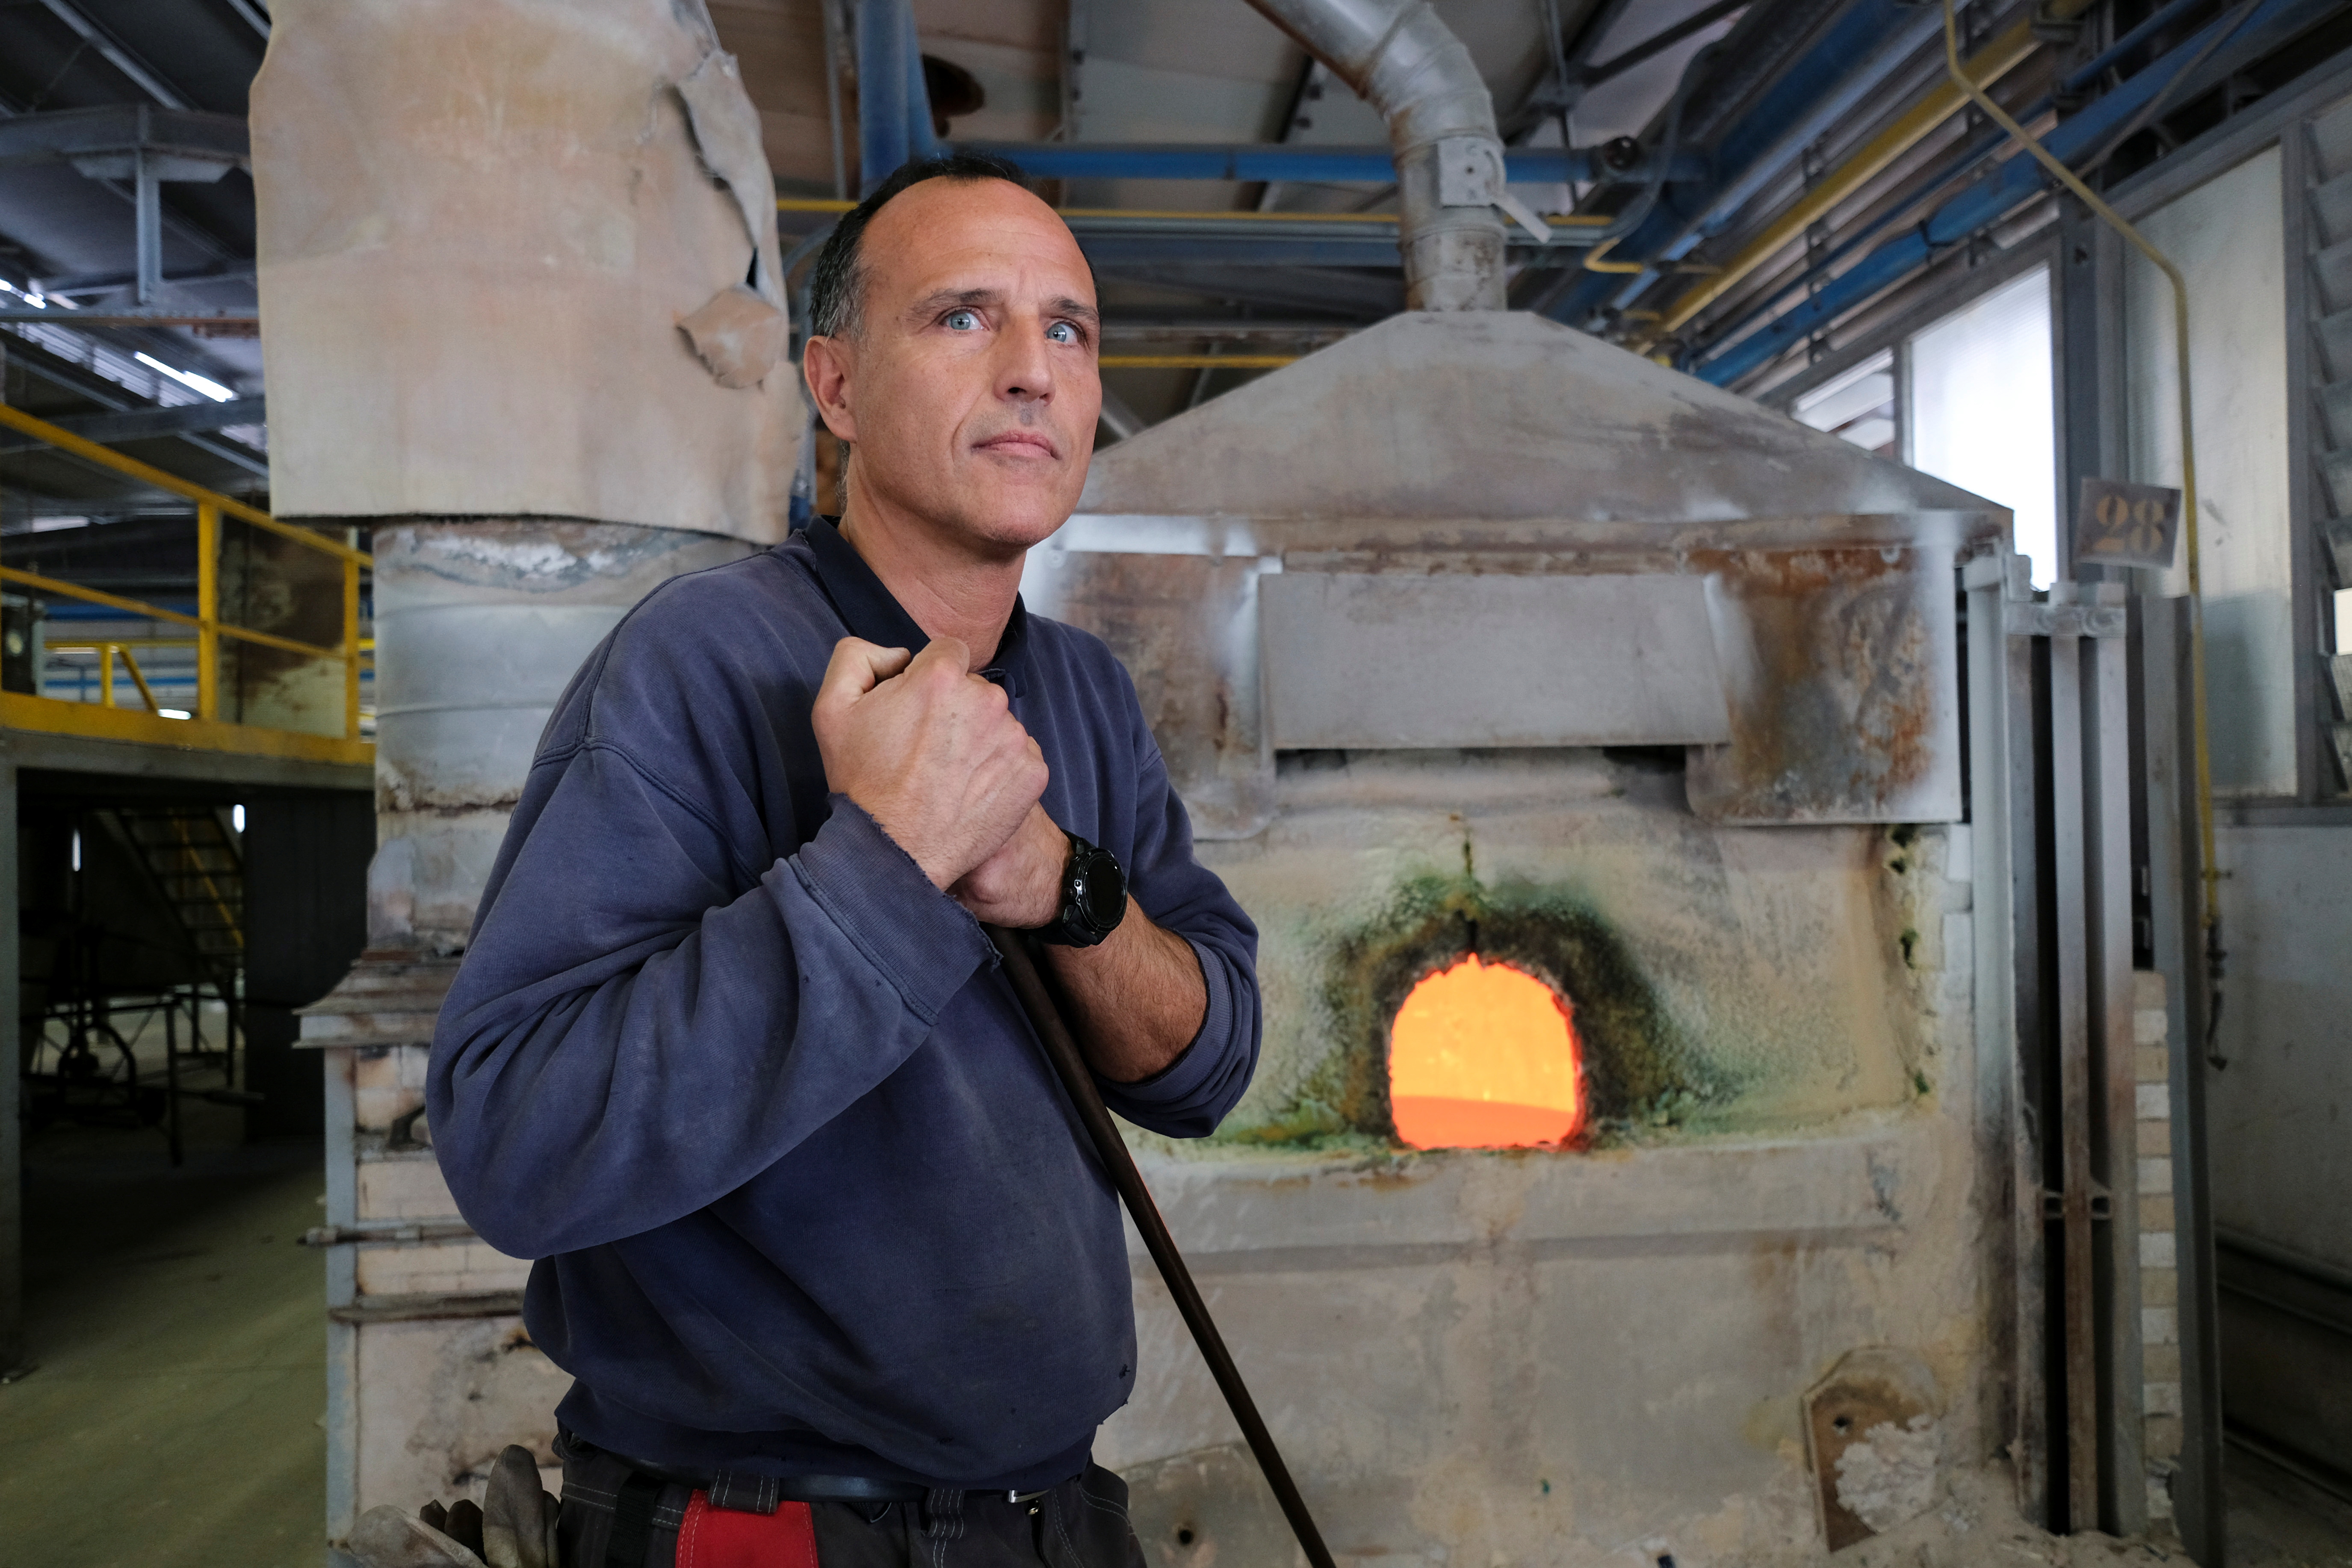 Venice's famous Murano glassblowers threatened by closure due to soaring gas prices